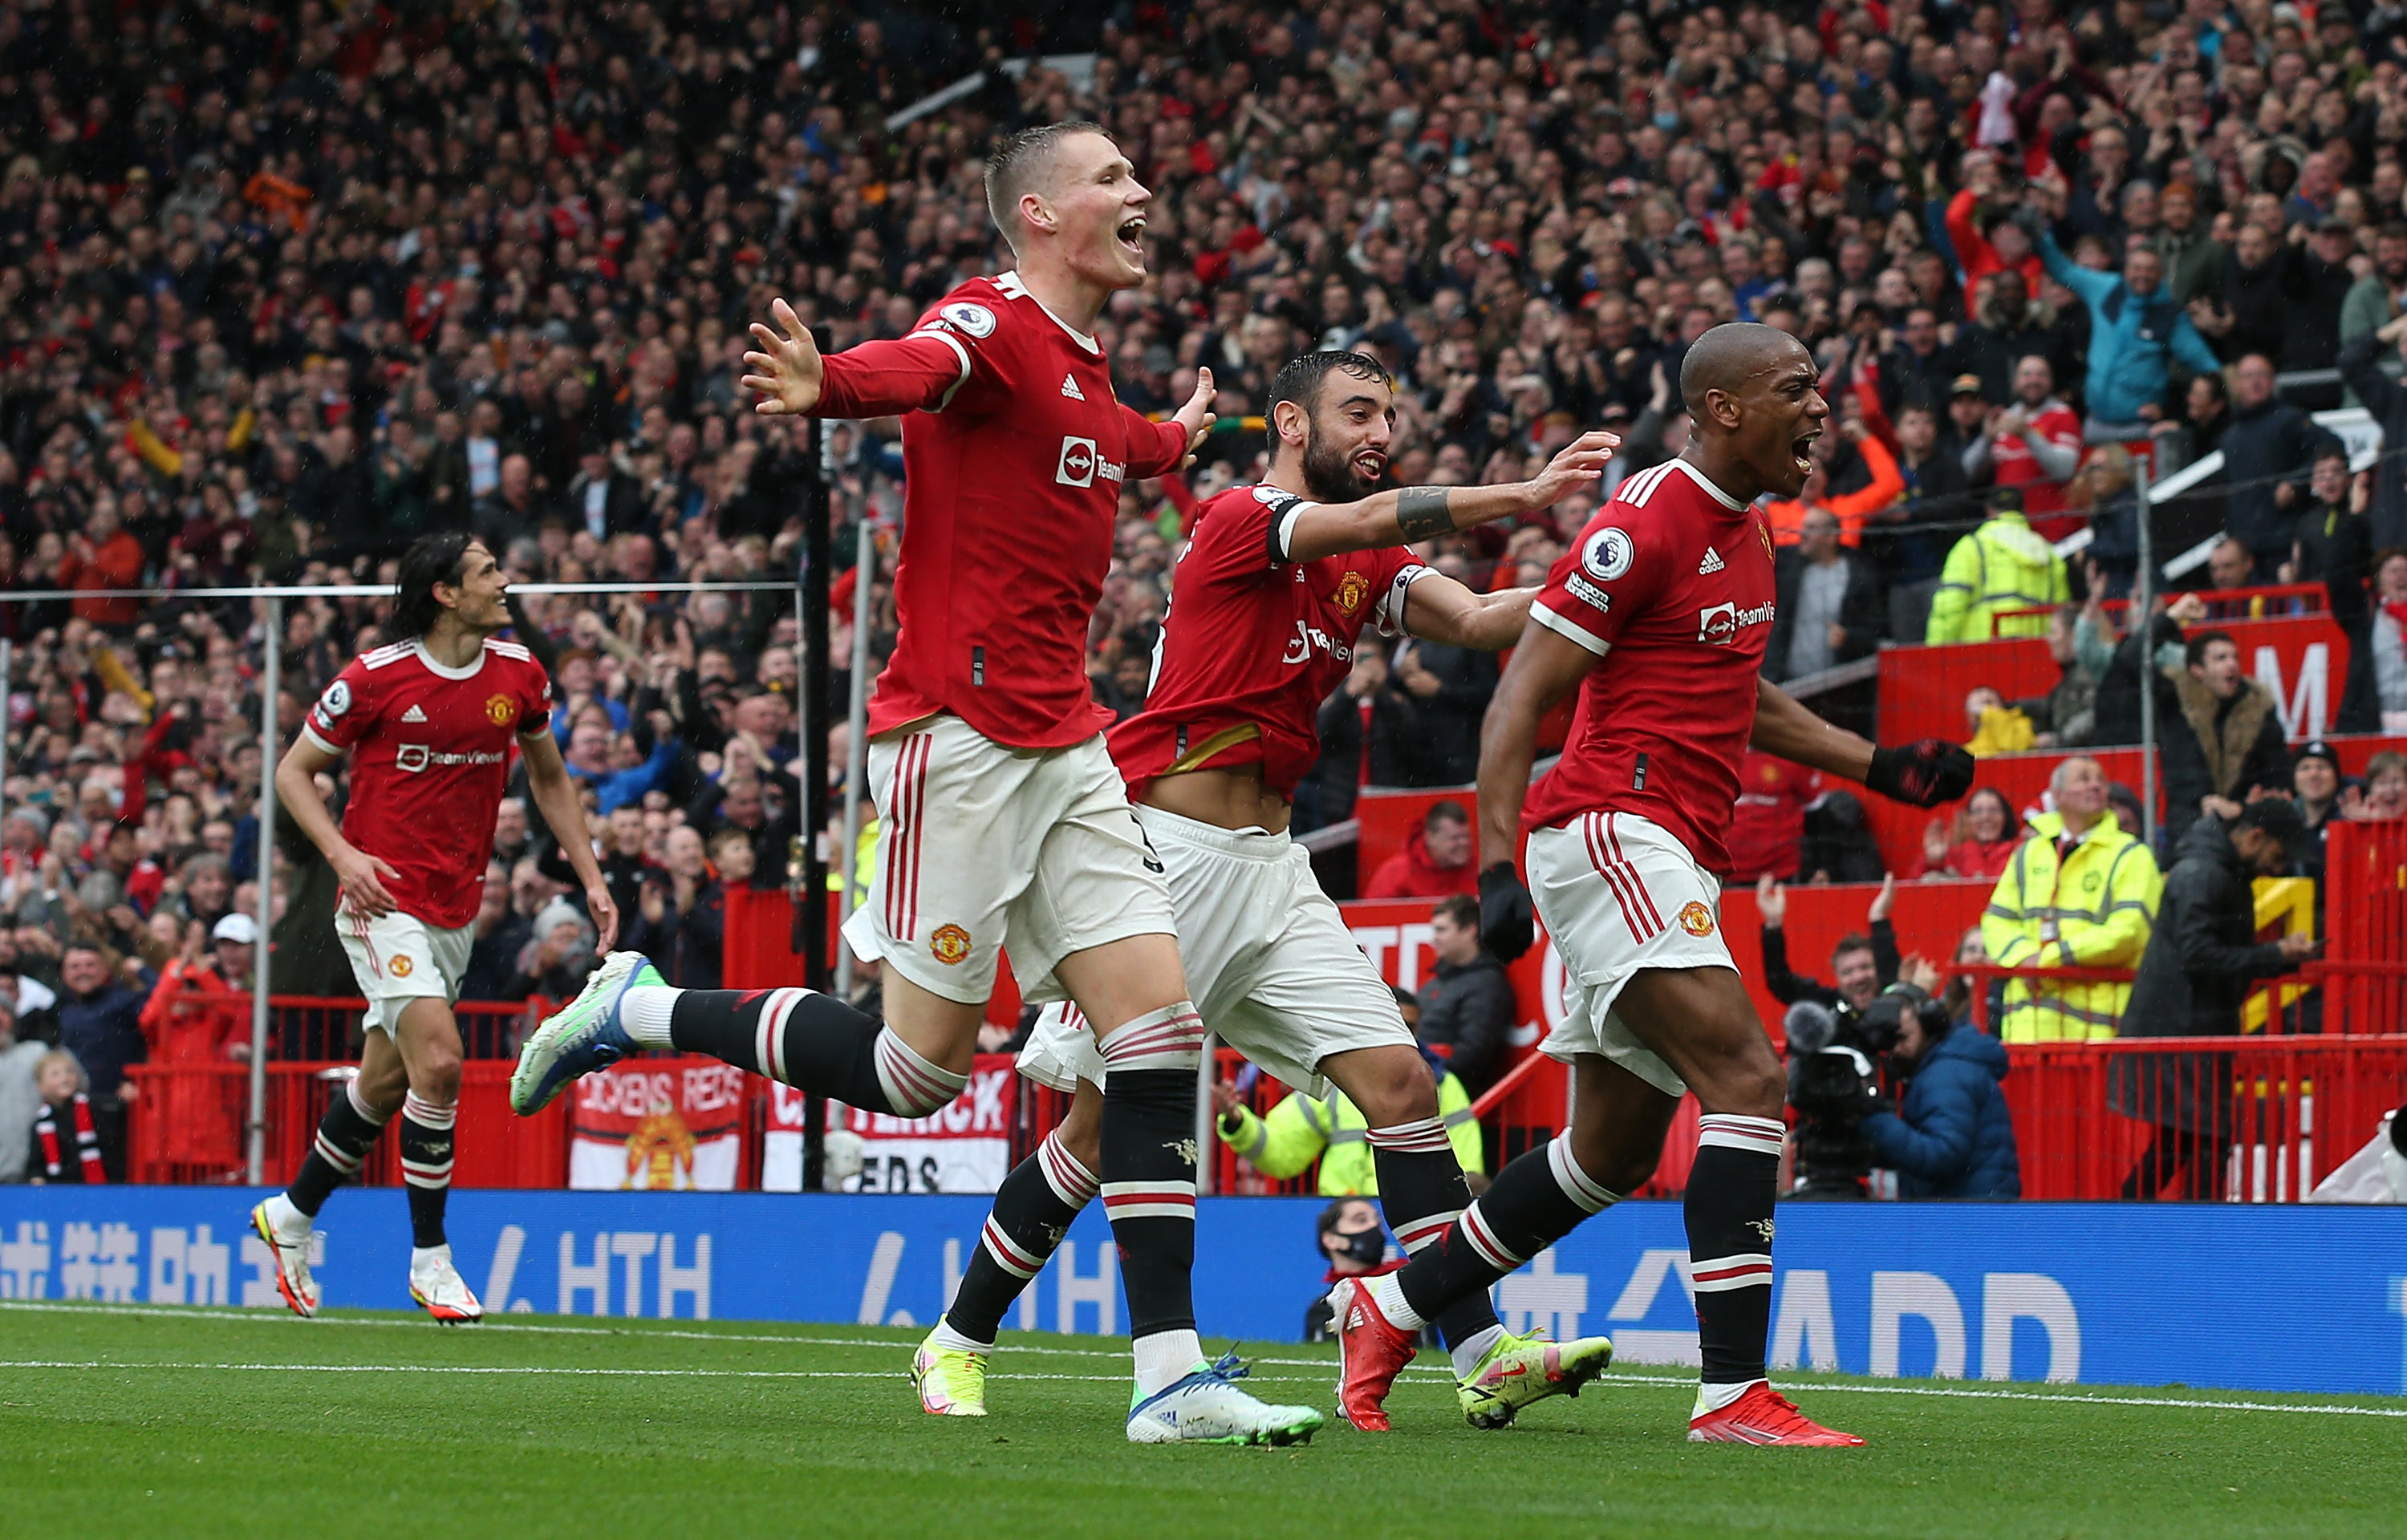 Manchester United celebrate their first-half goal in the Premier League